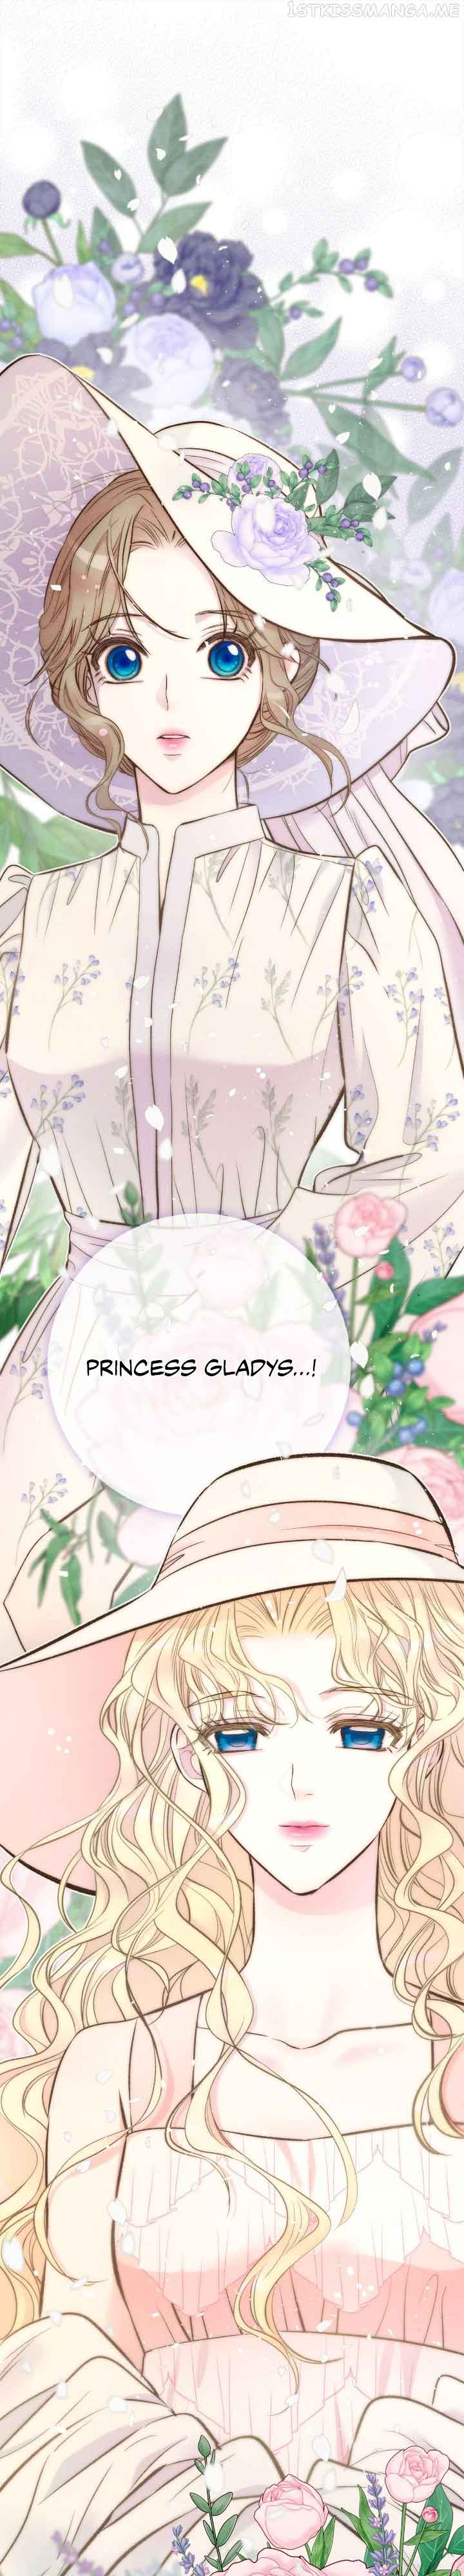 The Problematic Prince chapter 23